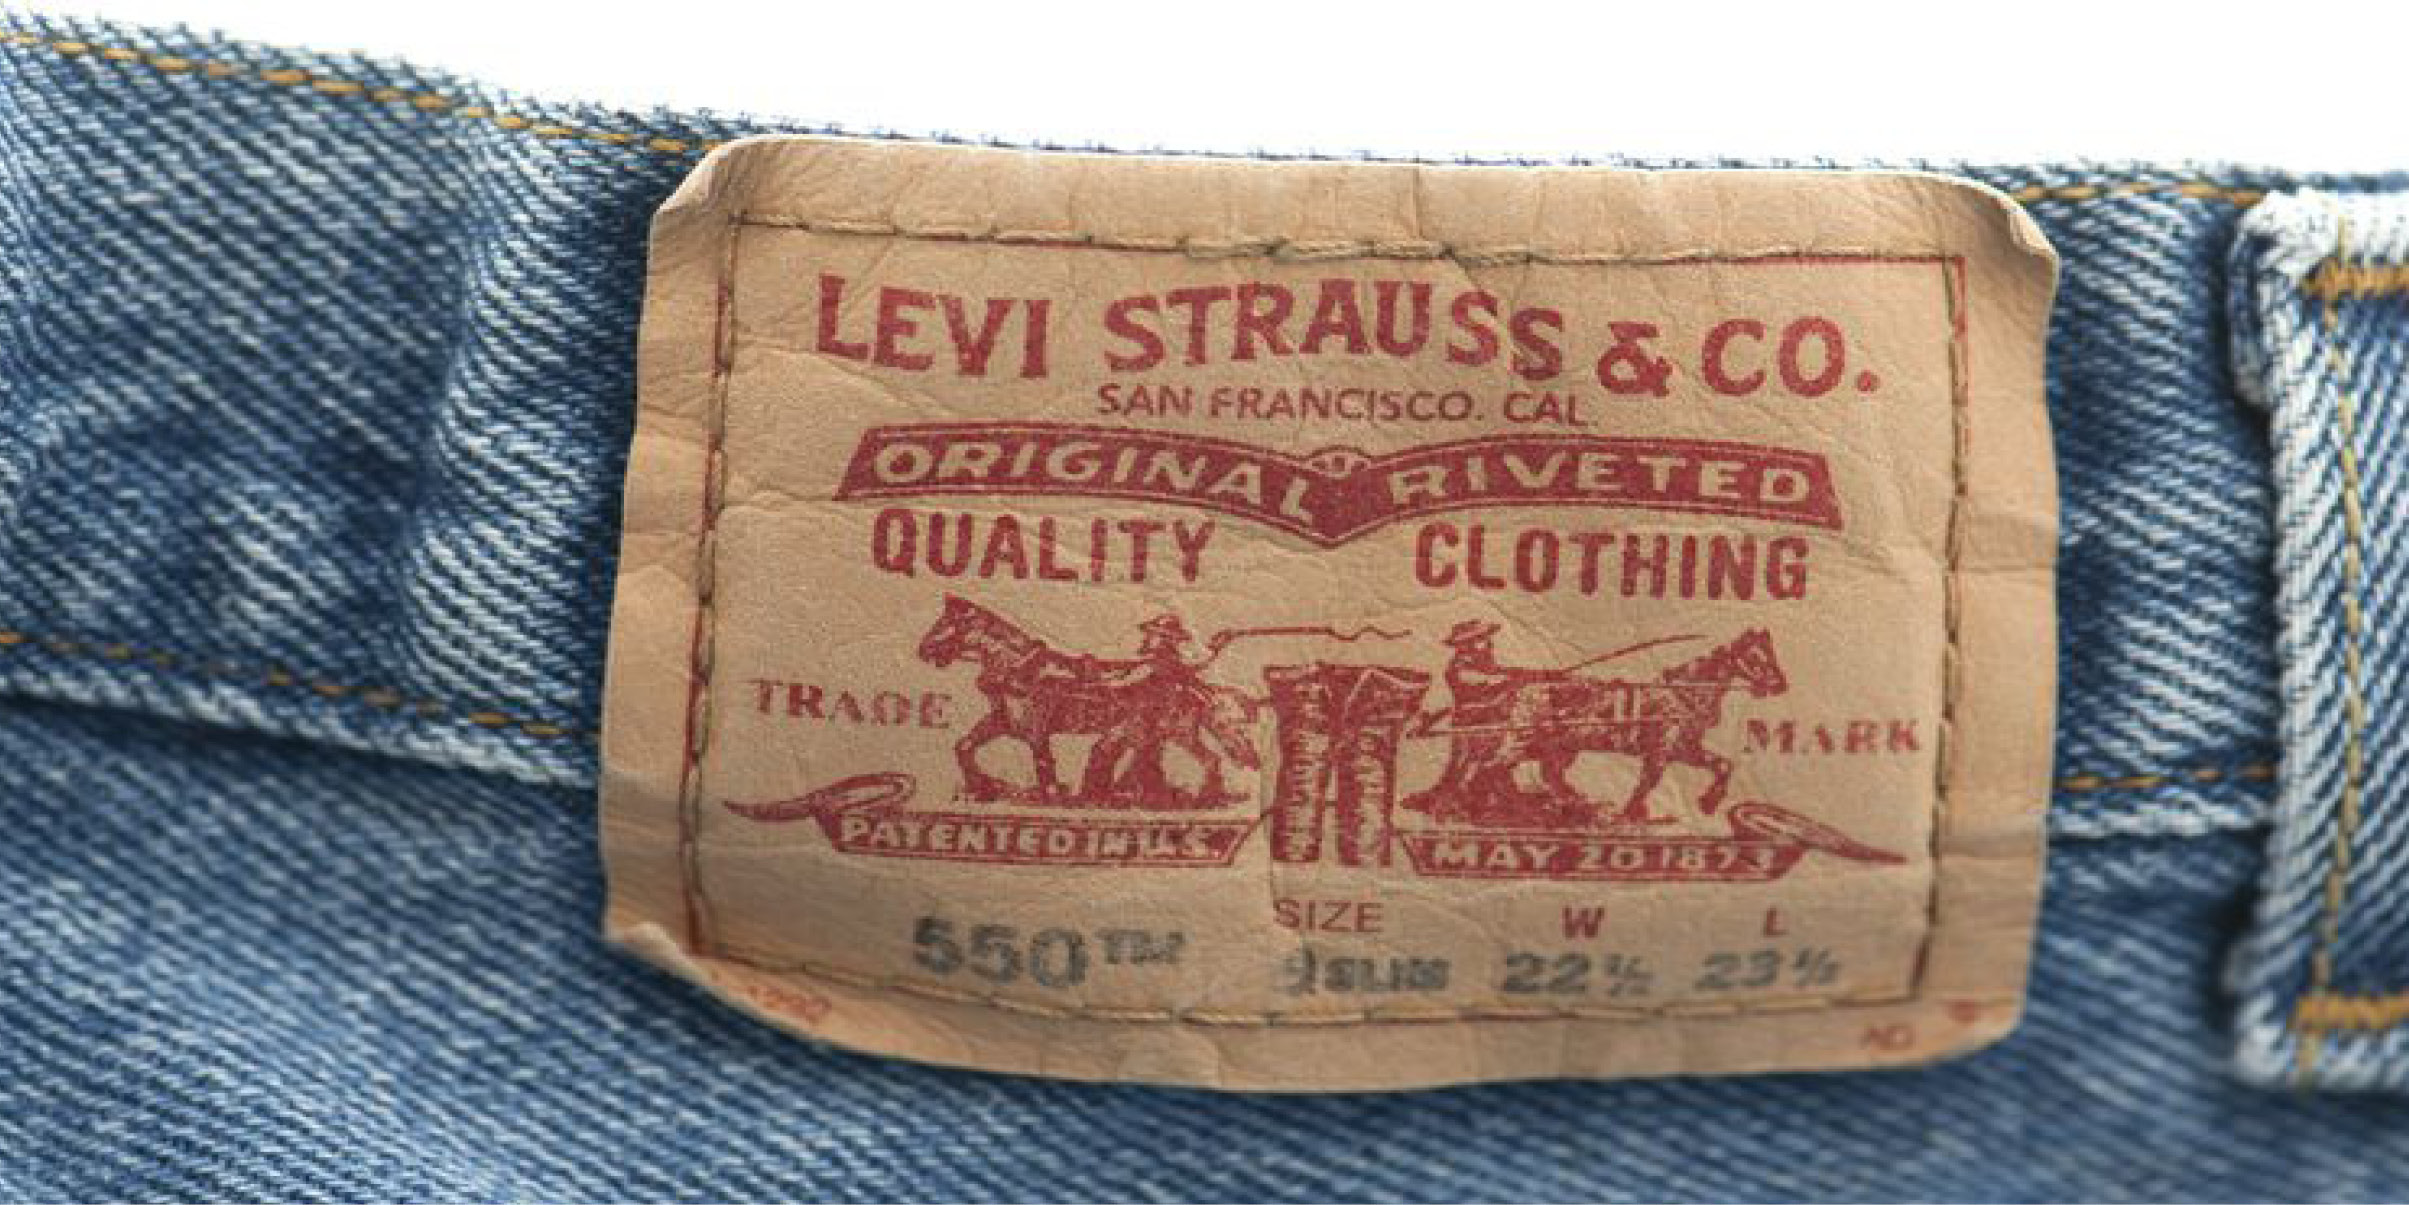 levi jeans with holes in the back